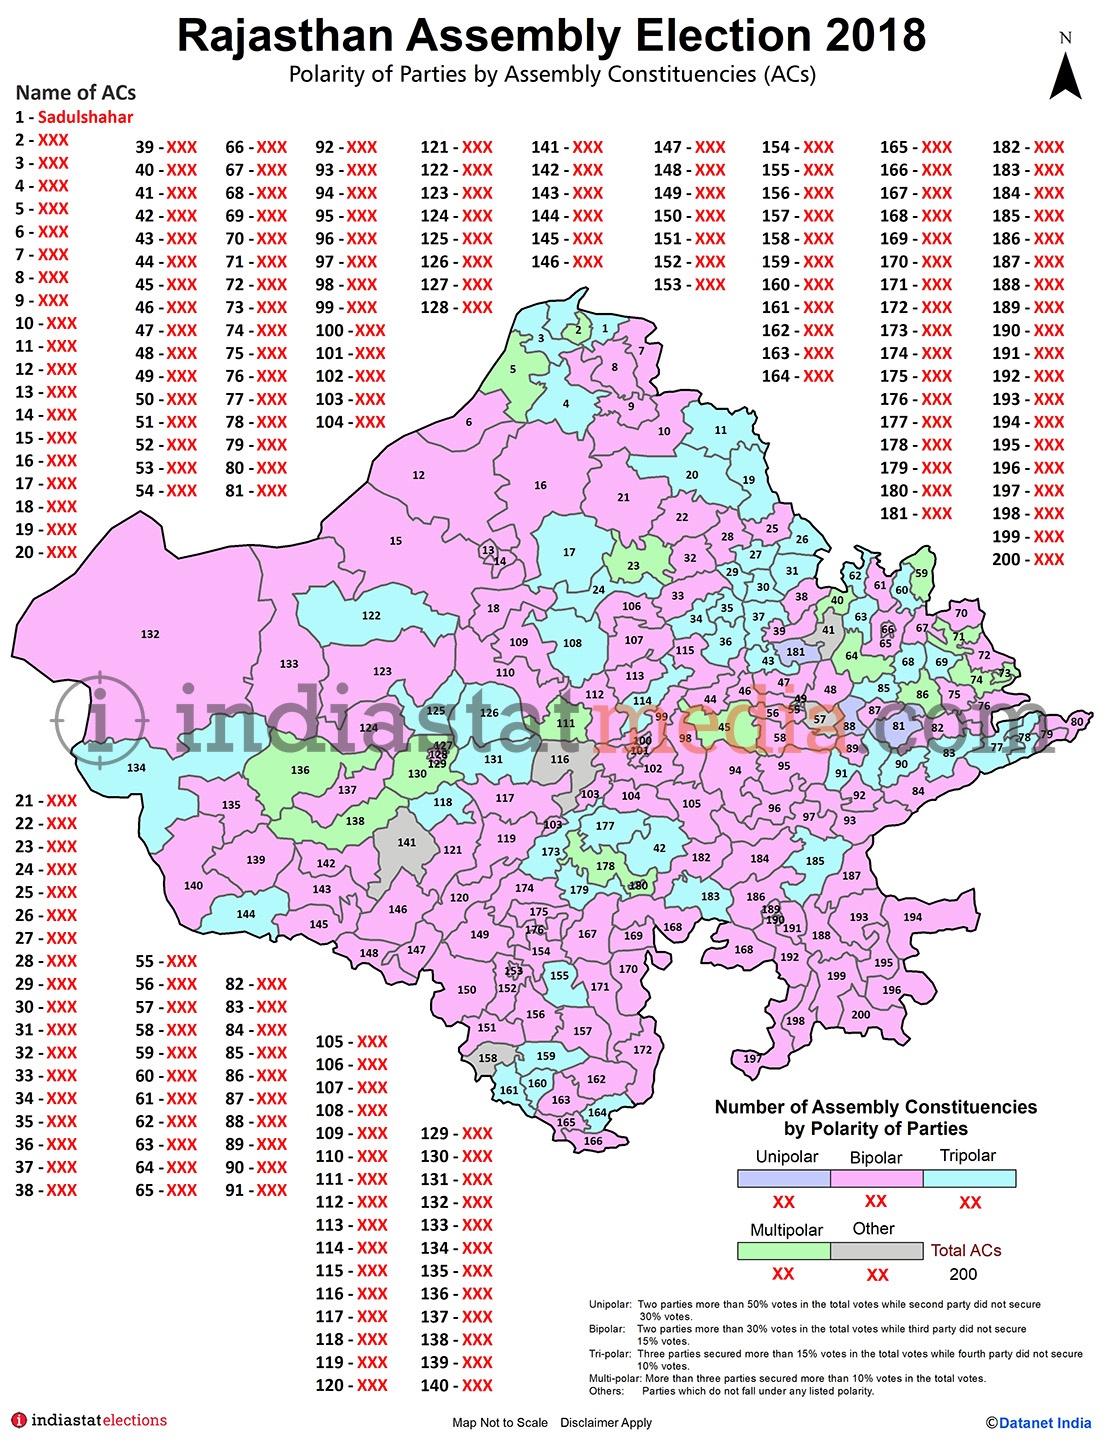 Polarity of Parties by Assembly Constituencies in Rajasthan (Assembly Election - 2018)